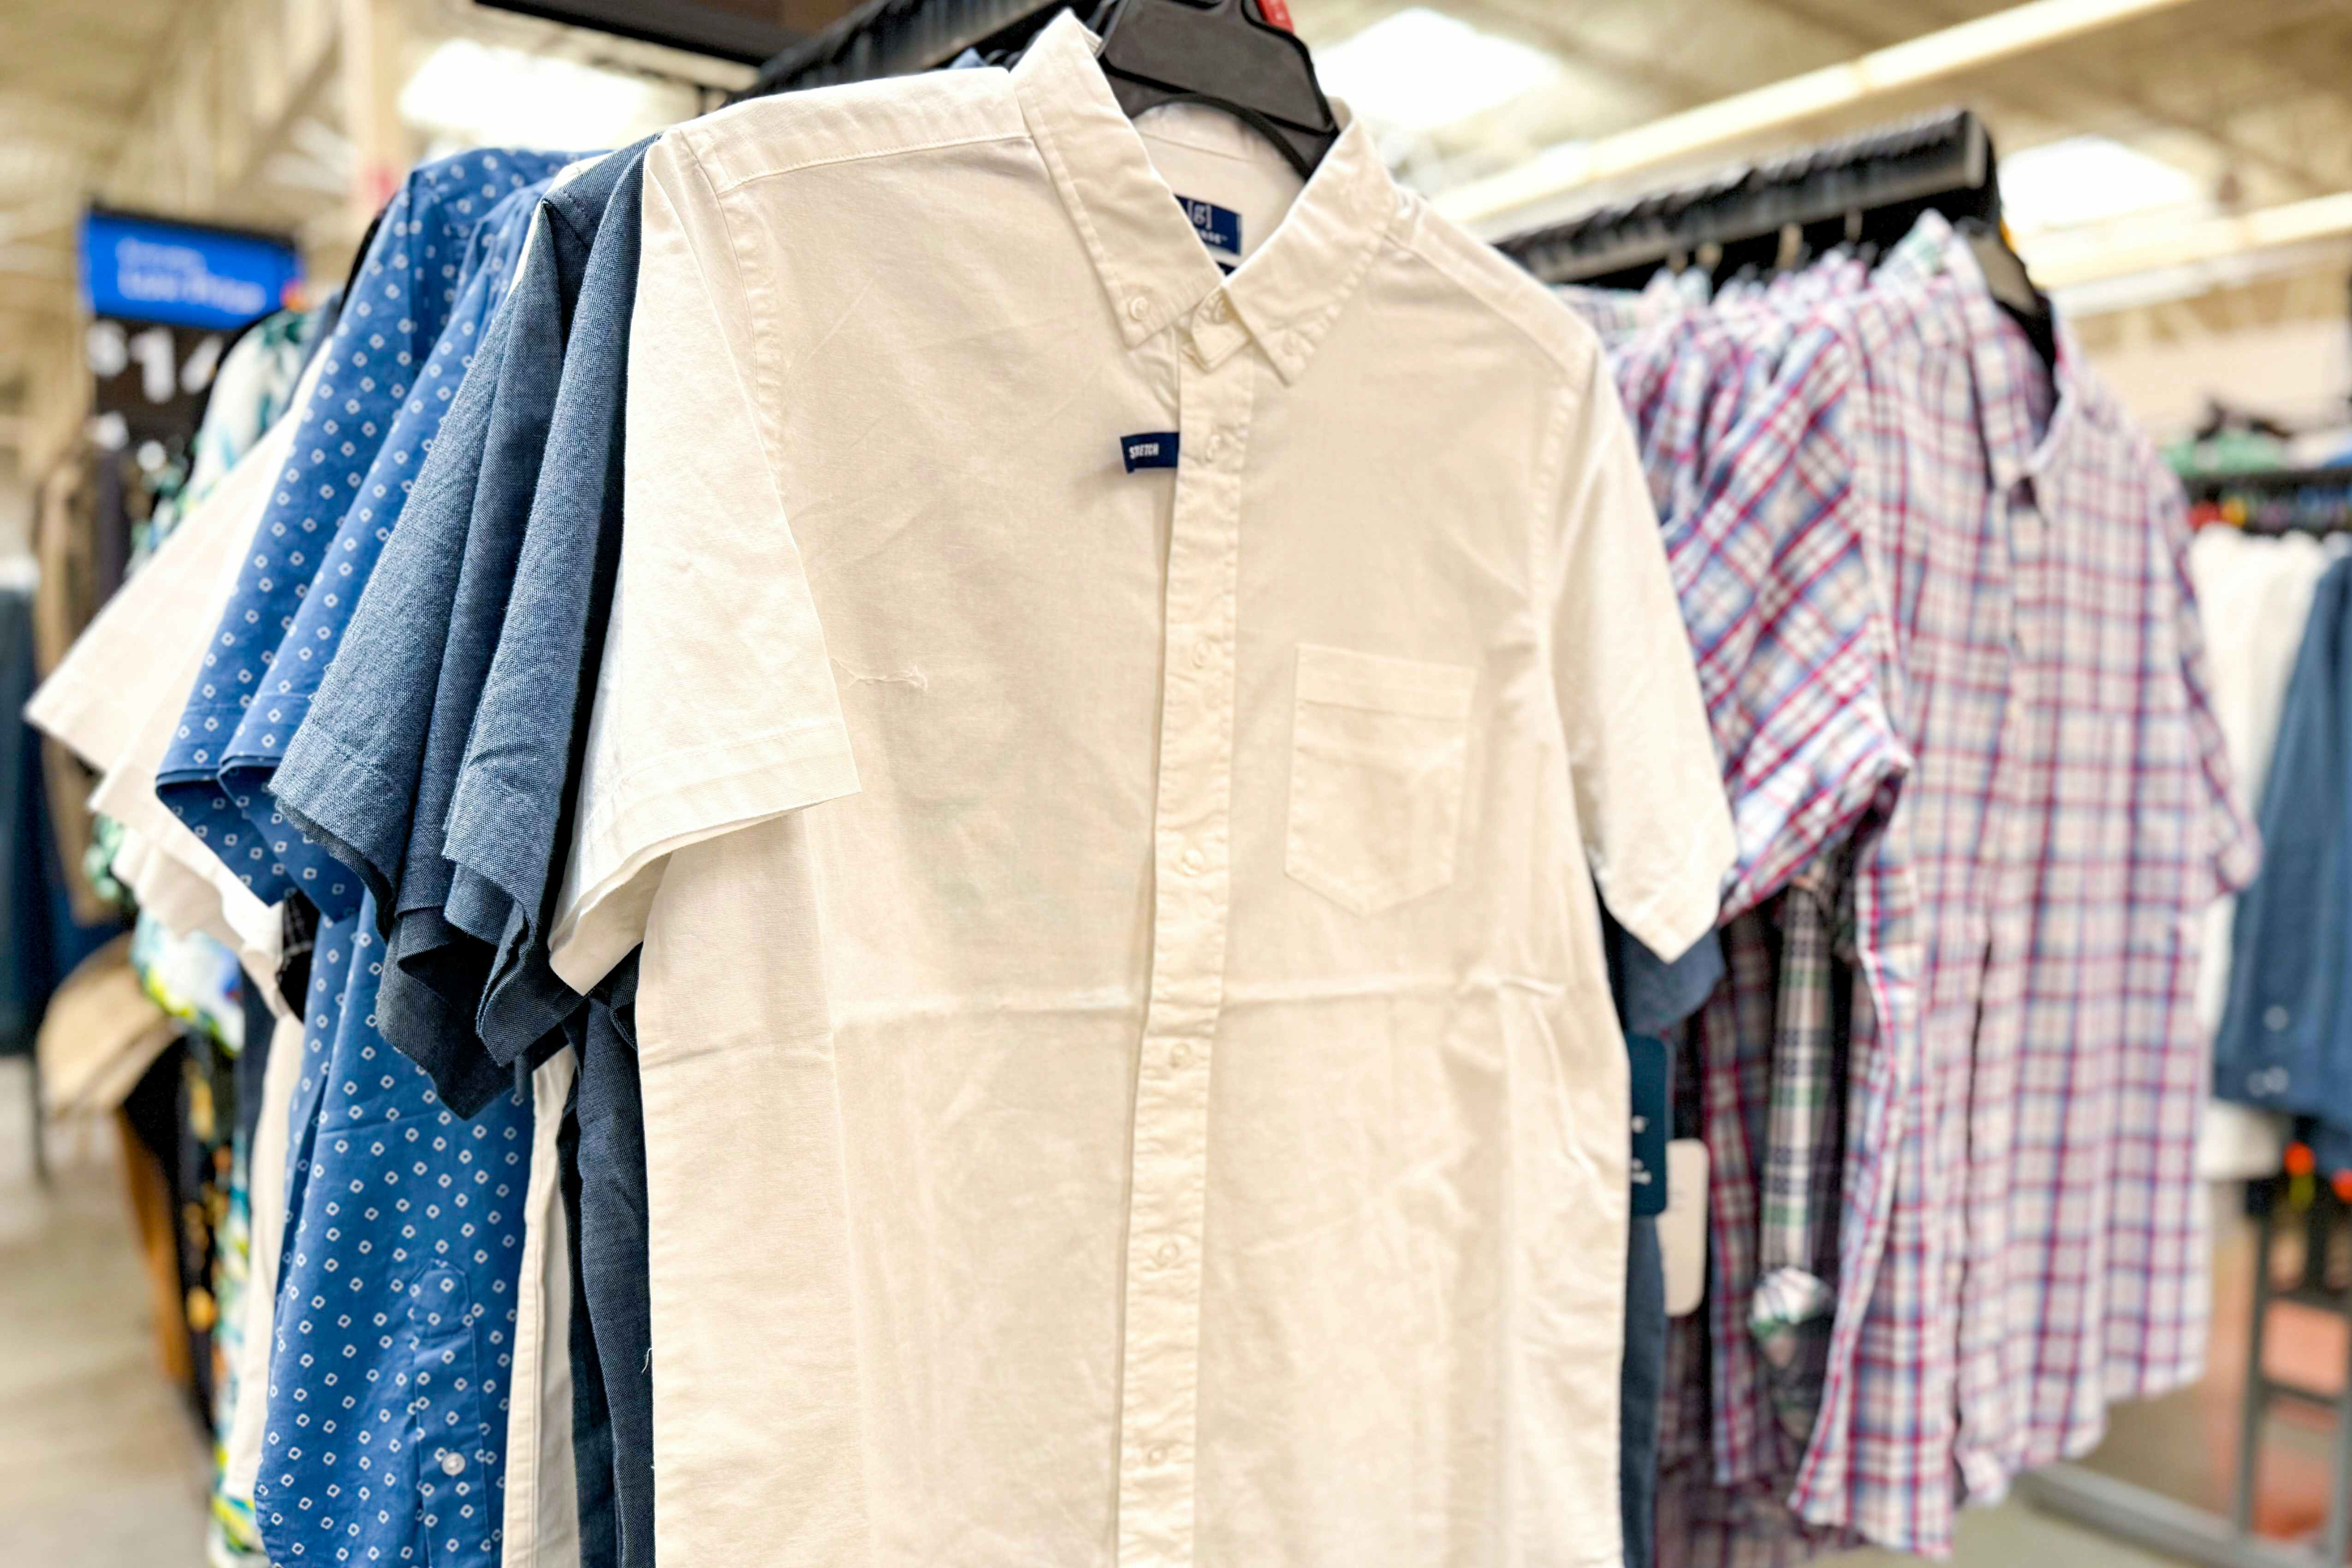 Men's Button-Down Shirts at Walmart: Clearance Prices Start at Just $9